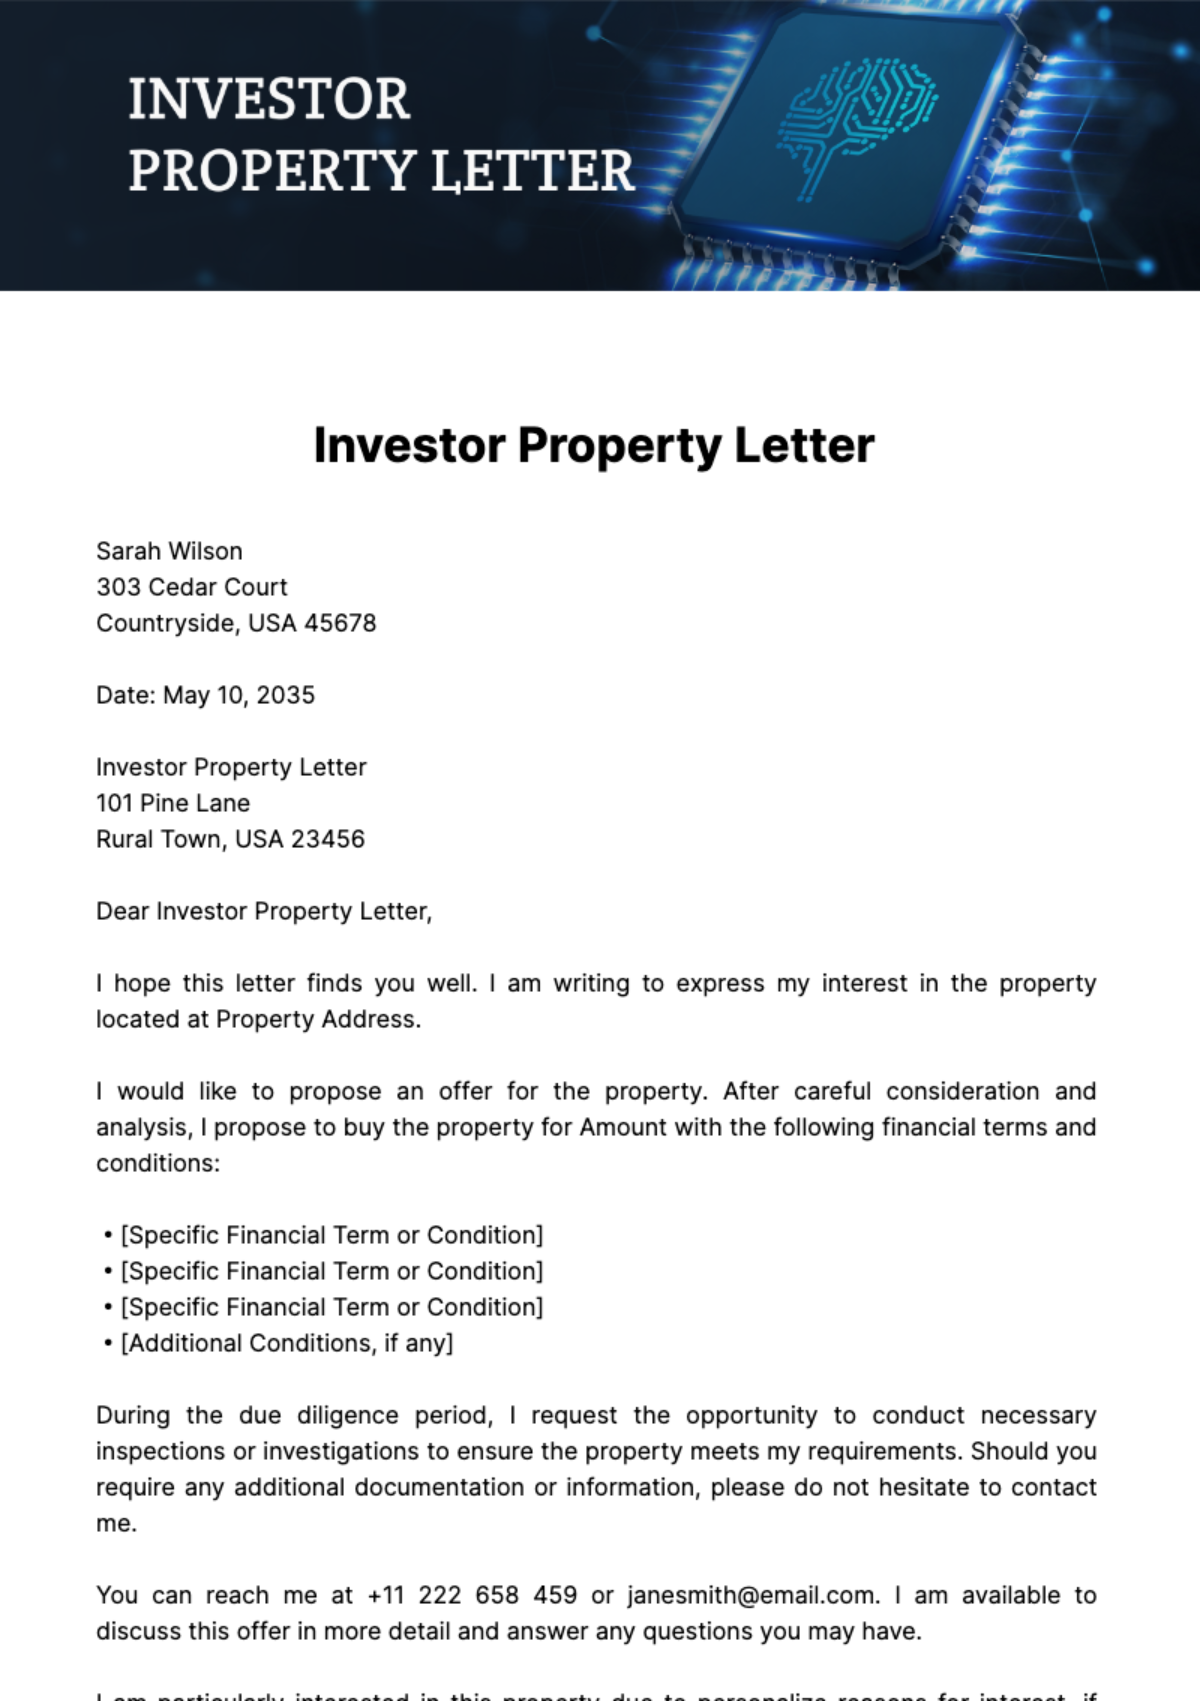 Free Investor Property Letter Template